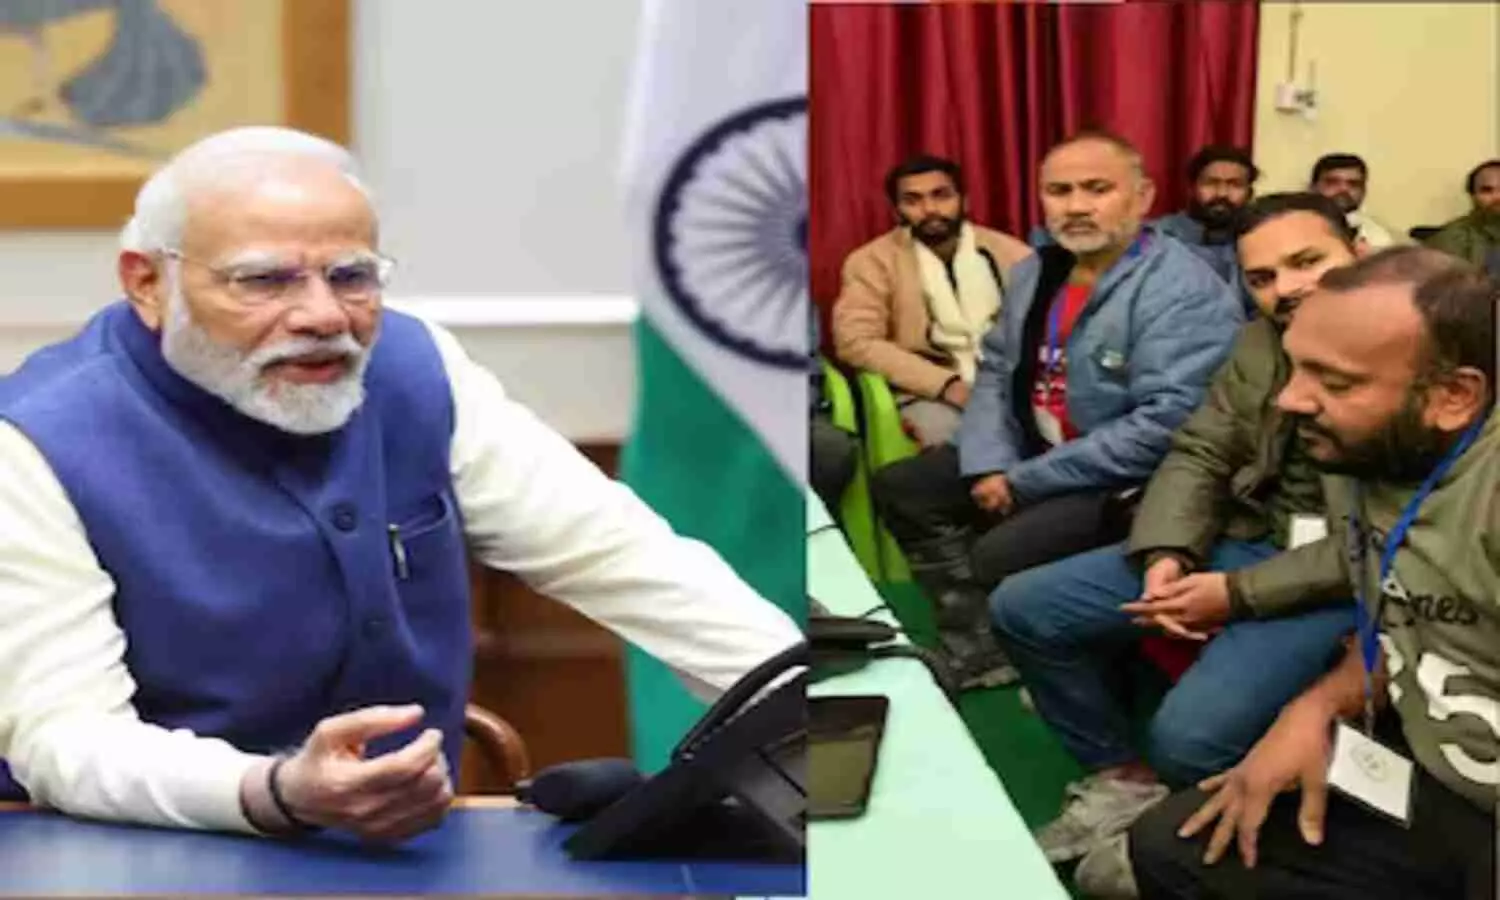 PM Modi talked with workers